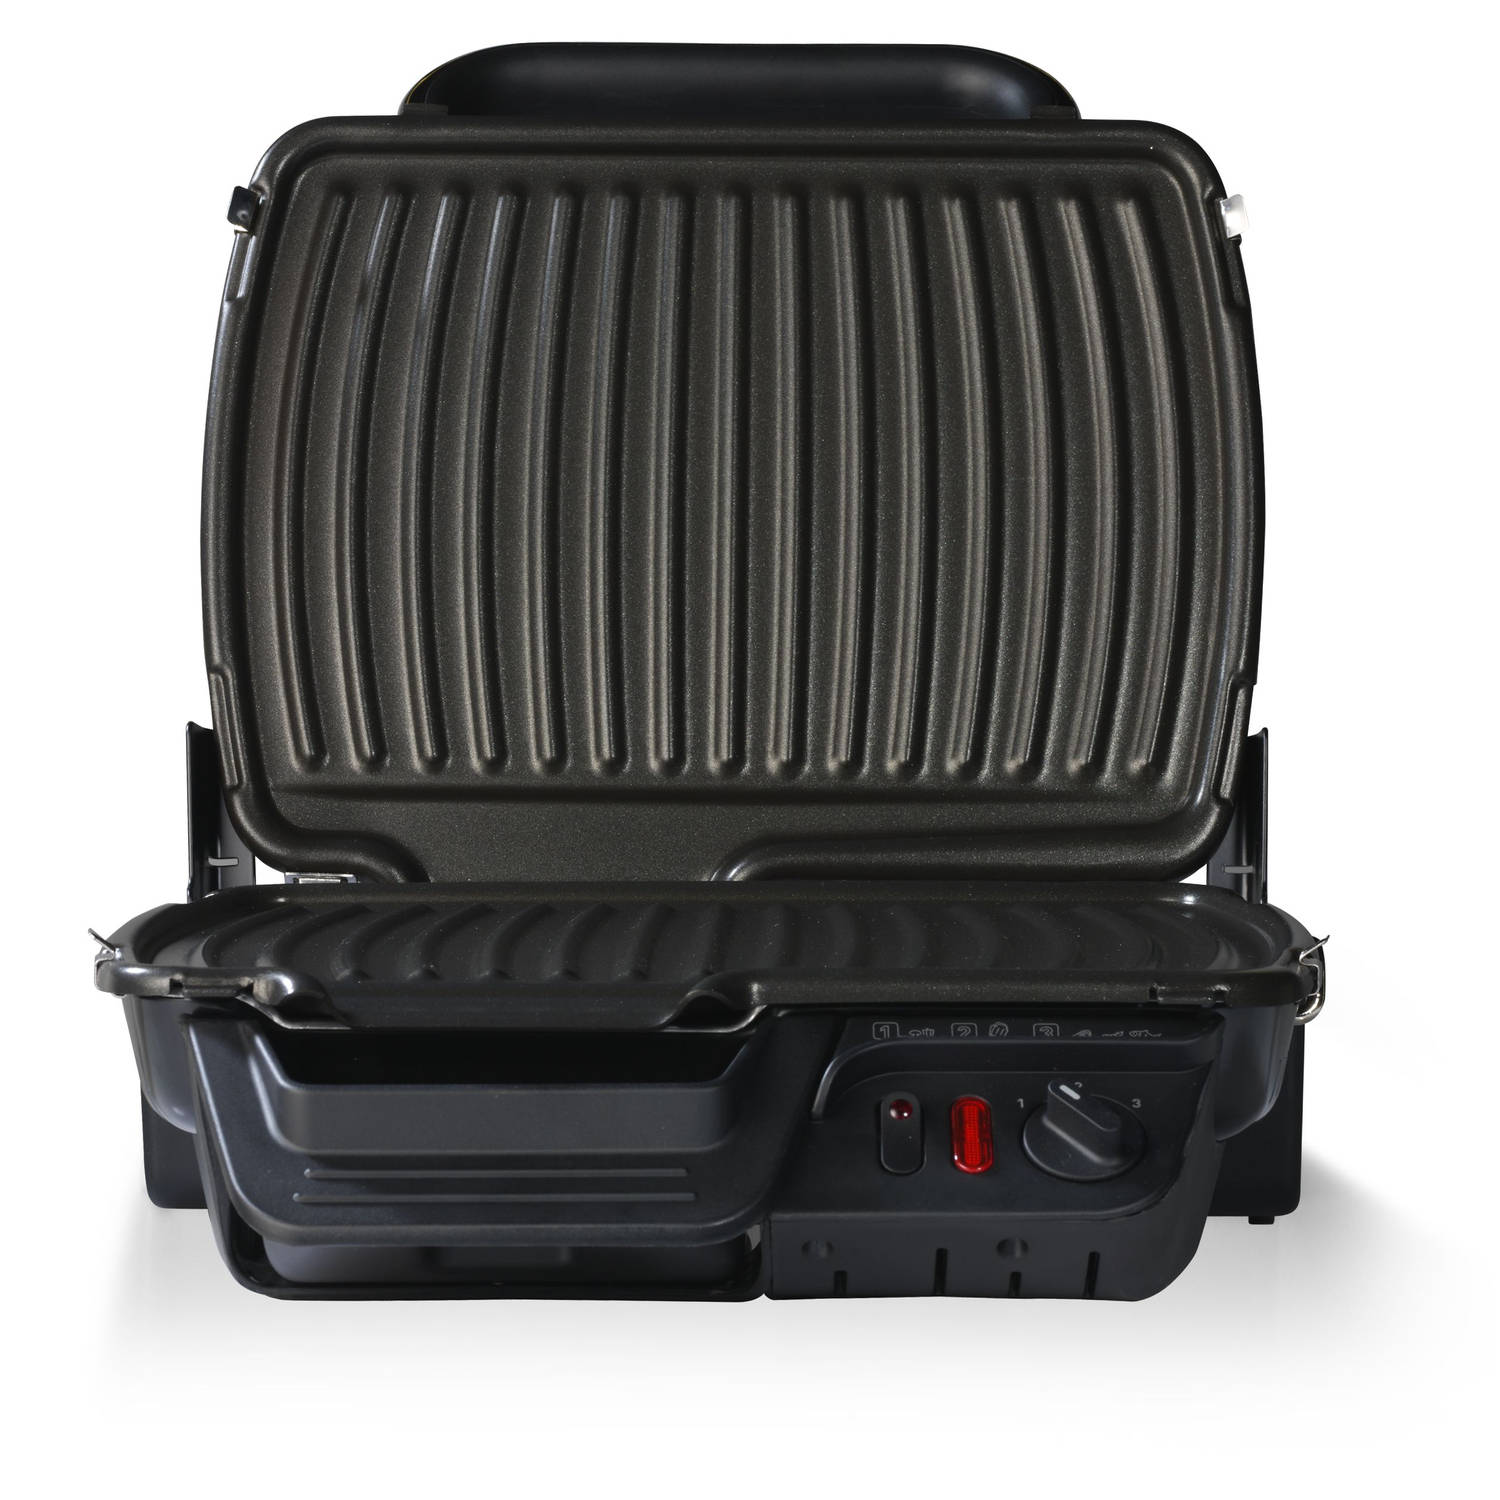 soep gegevens Vluchtig Tefal GC3058 Contactgrill Ultracompact 2000W | Blokker